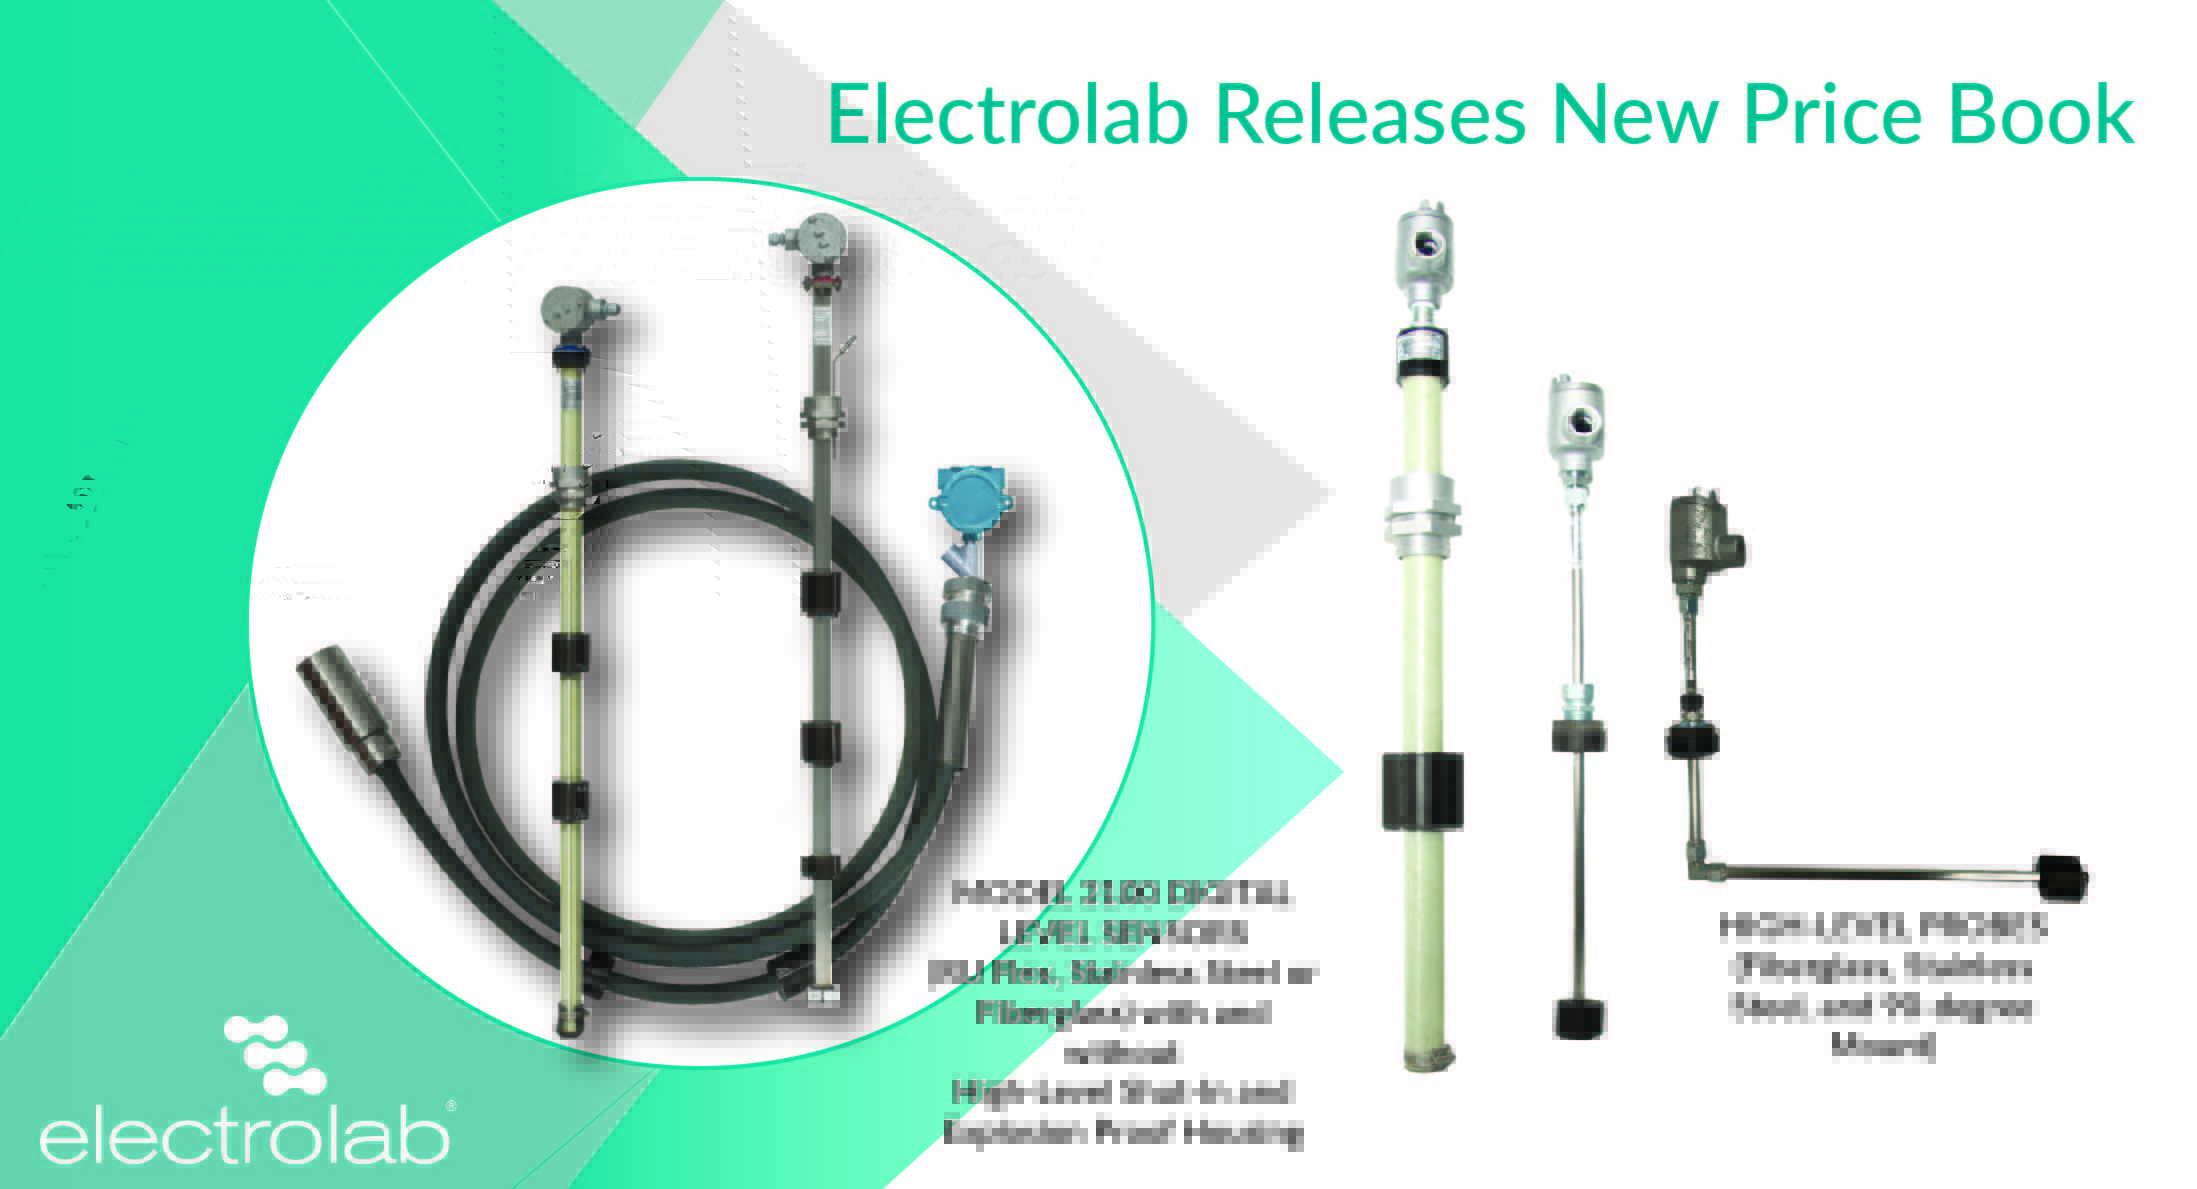 Electrolab Products_New Price Book